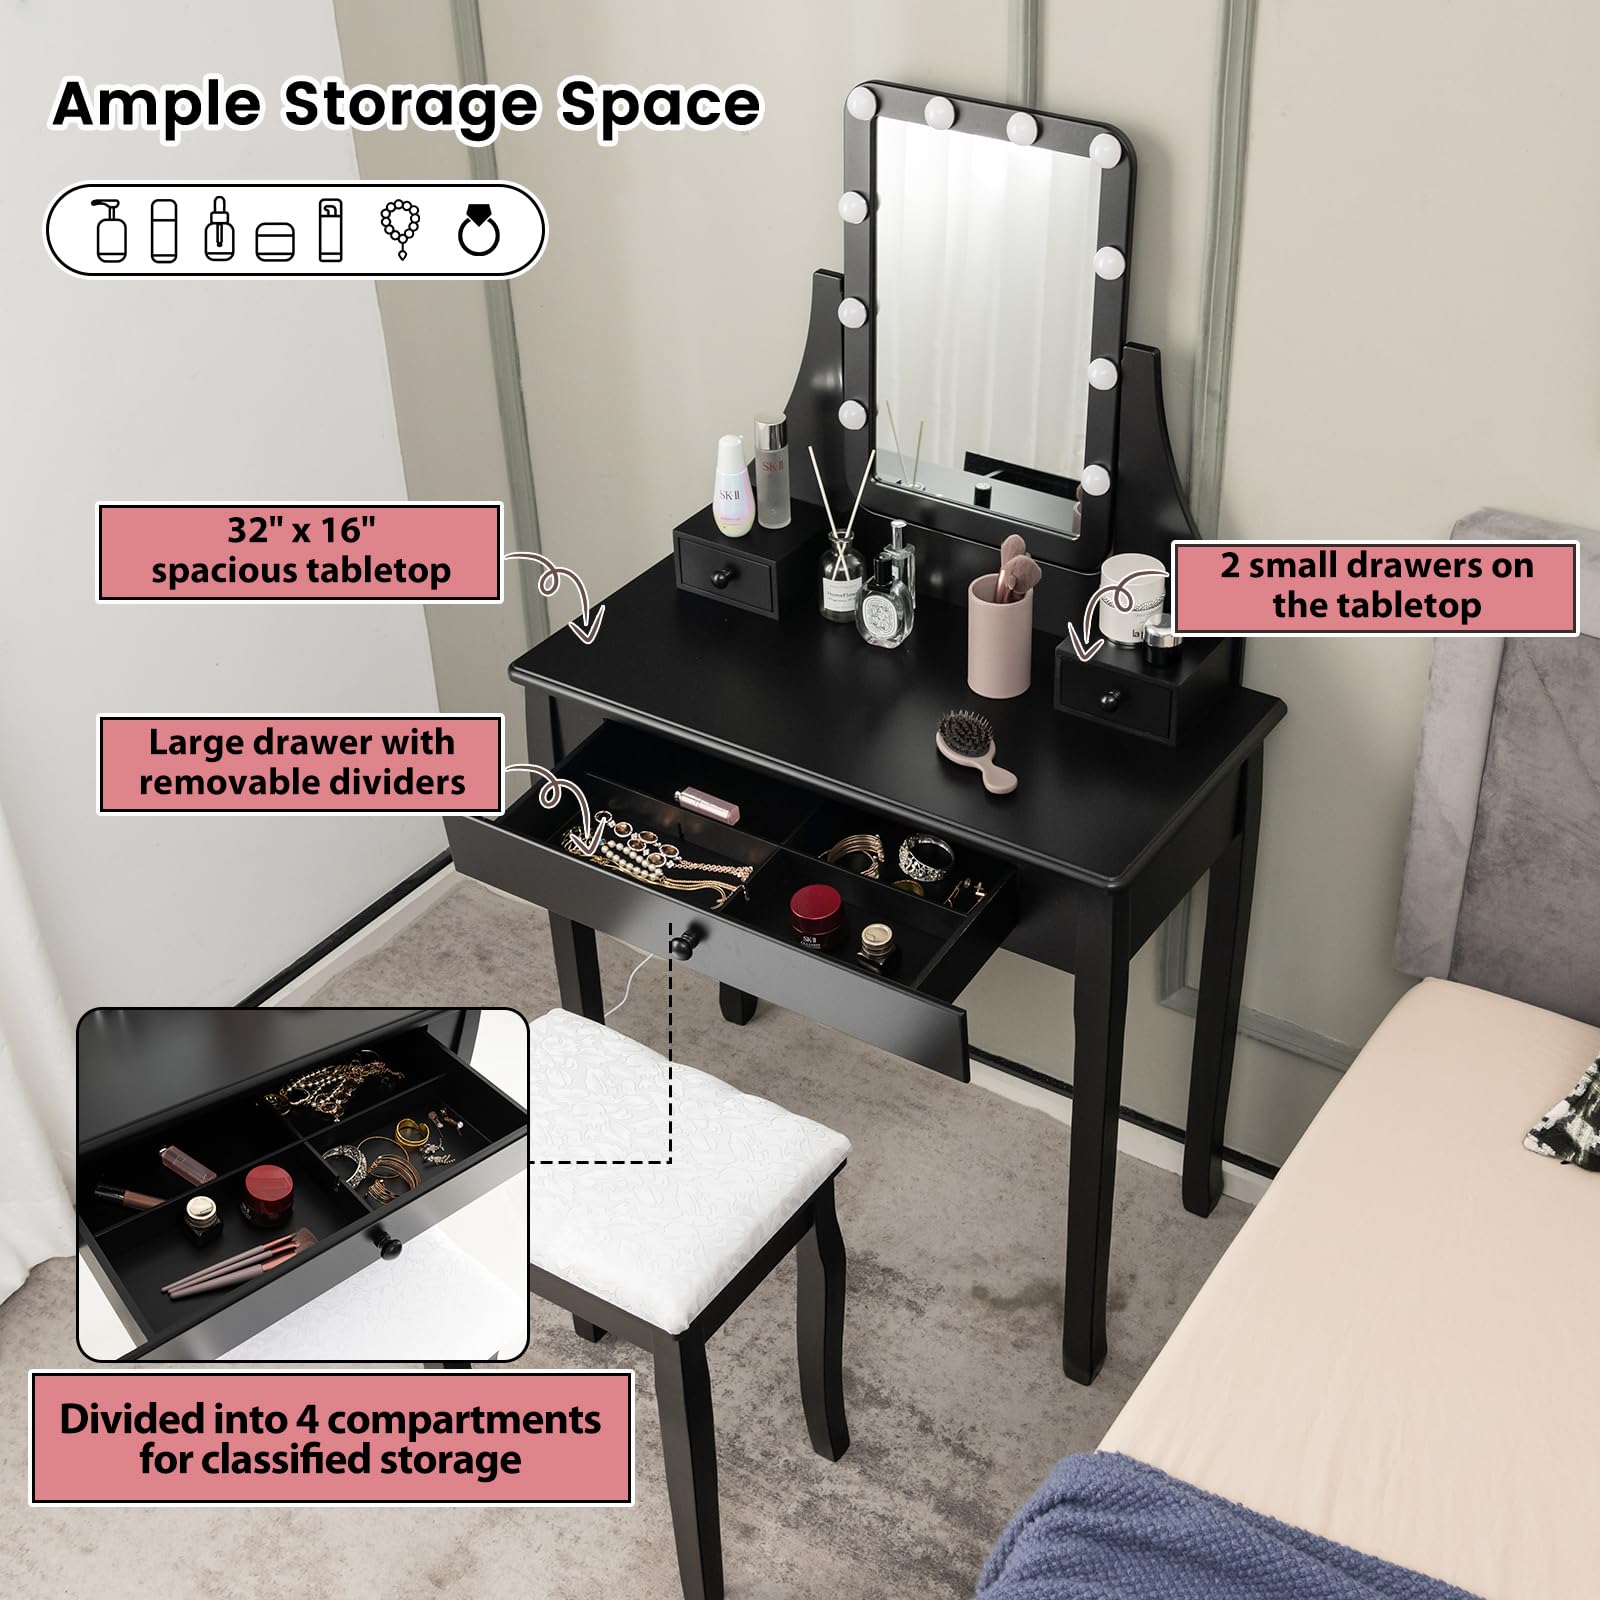 CHARMAID Makeup Vanity Desk with Lighted Mirror, 3 Color Lighting Modes, Adjustable Brightness, 3 Drawers